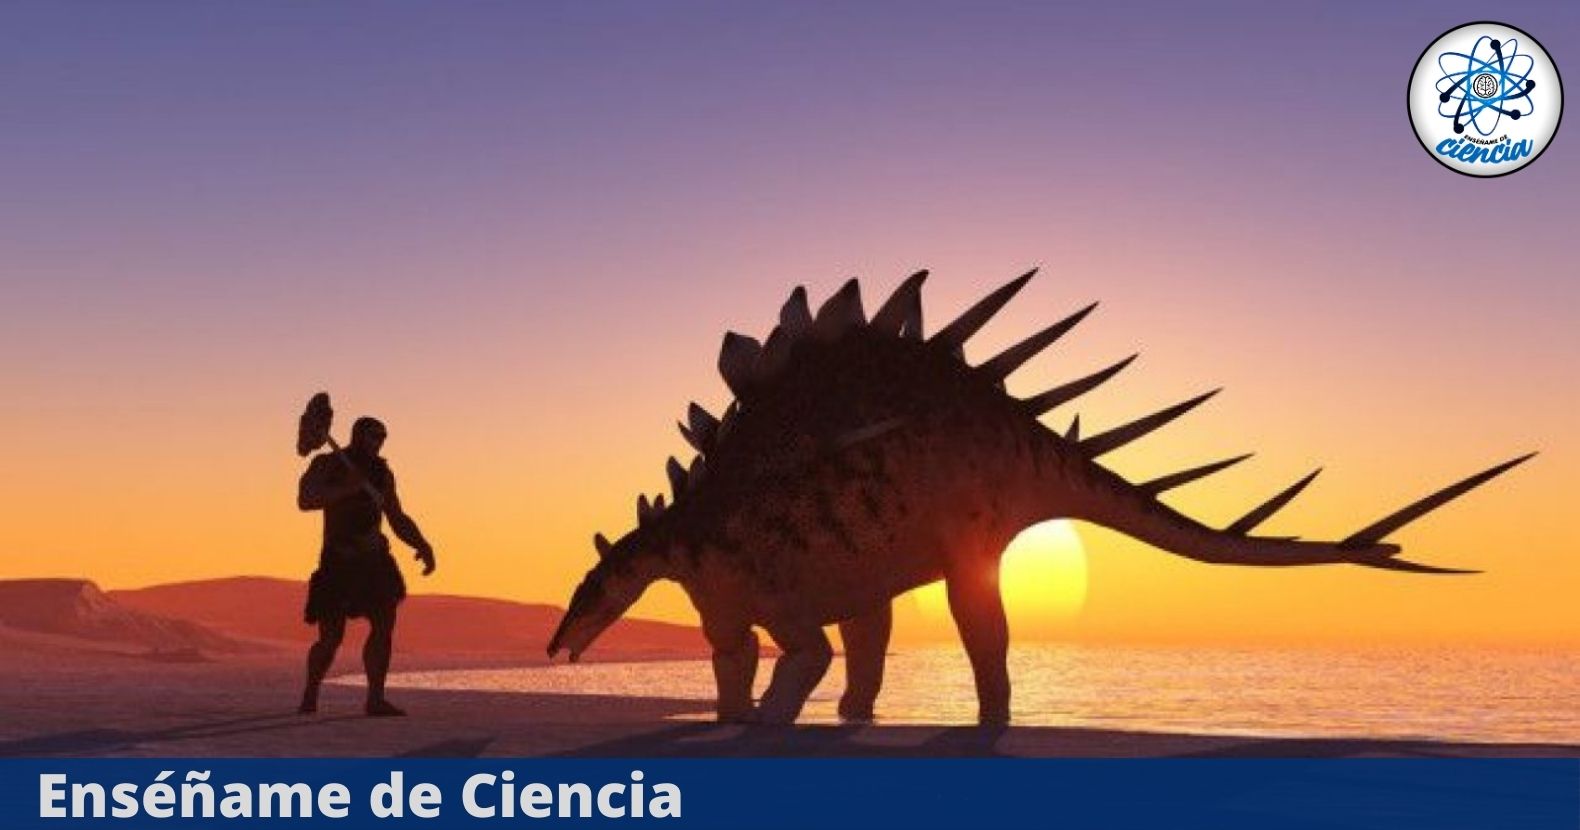 Isn’t it fantasy?  Scientists confirm that humans did indeed coexist with dinosaurs – Enseñame de Ciencia